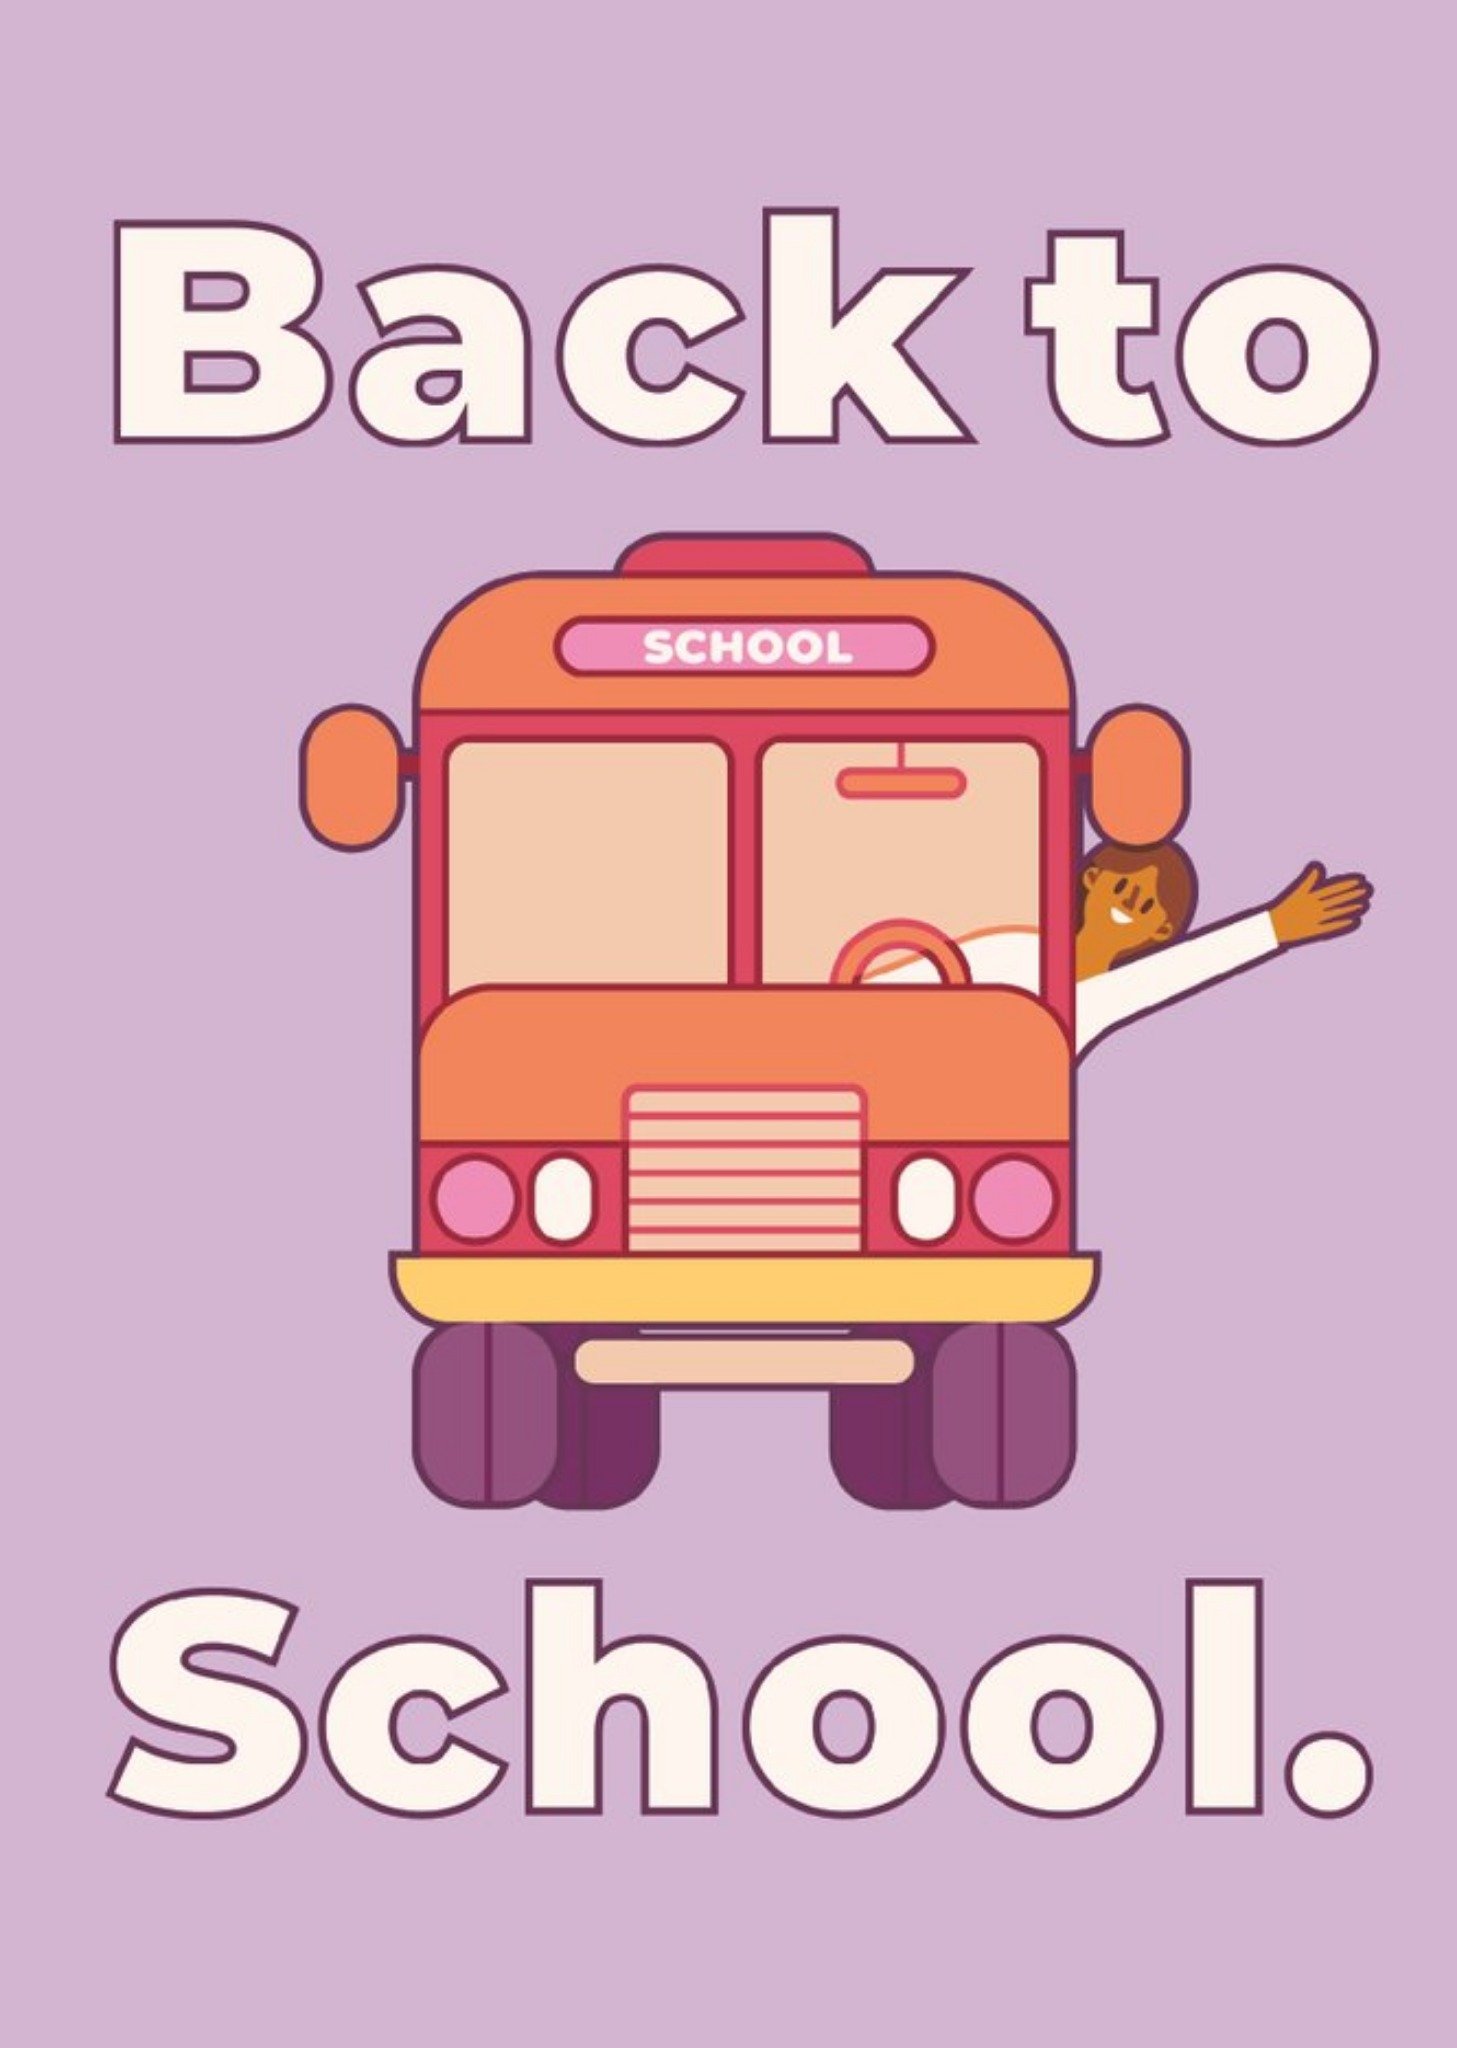 Moonpig Illustration Of A School Bus With A Driver Waving Back To School Card, Large